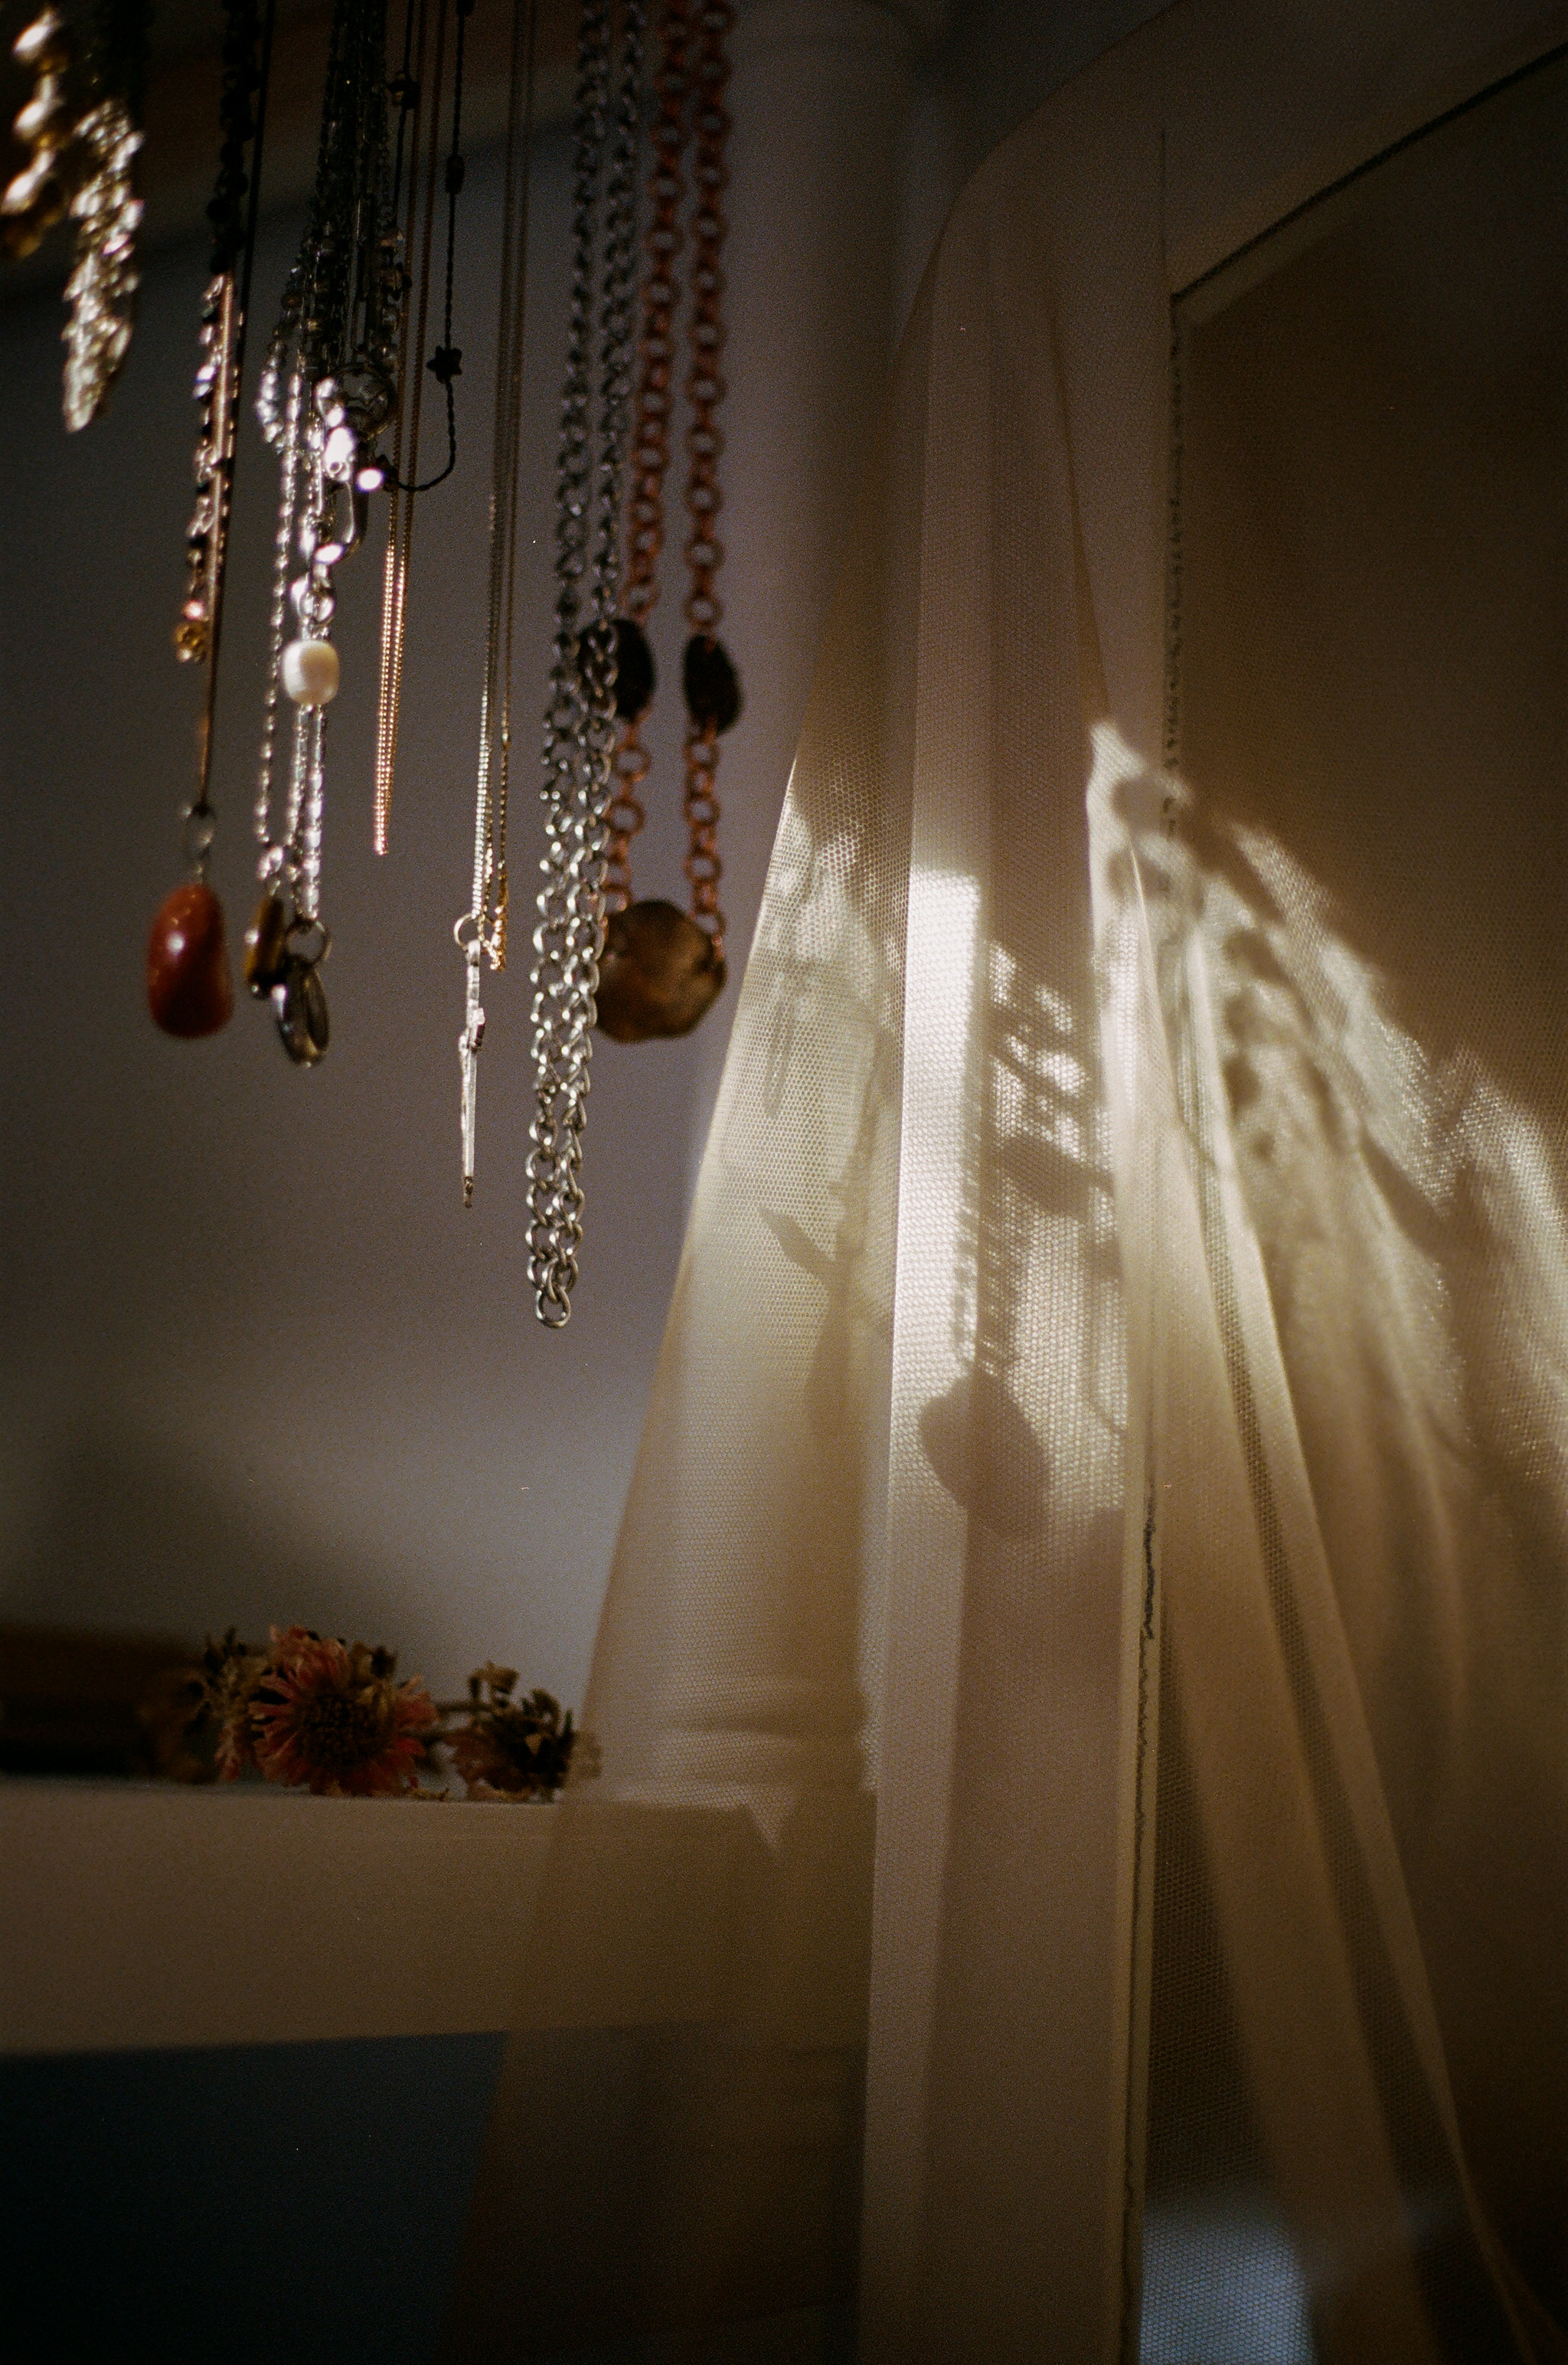 hanging necklaces and their shadows against a curtain